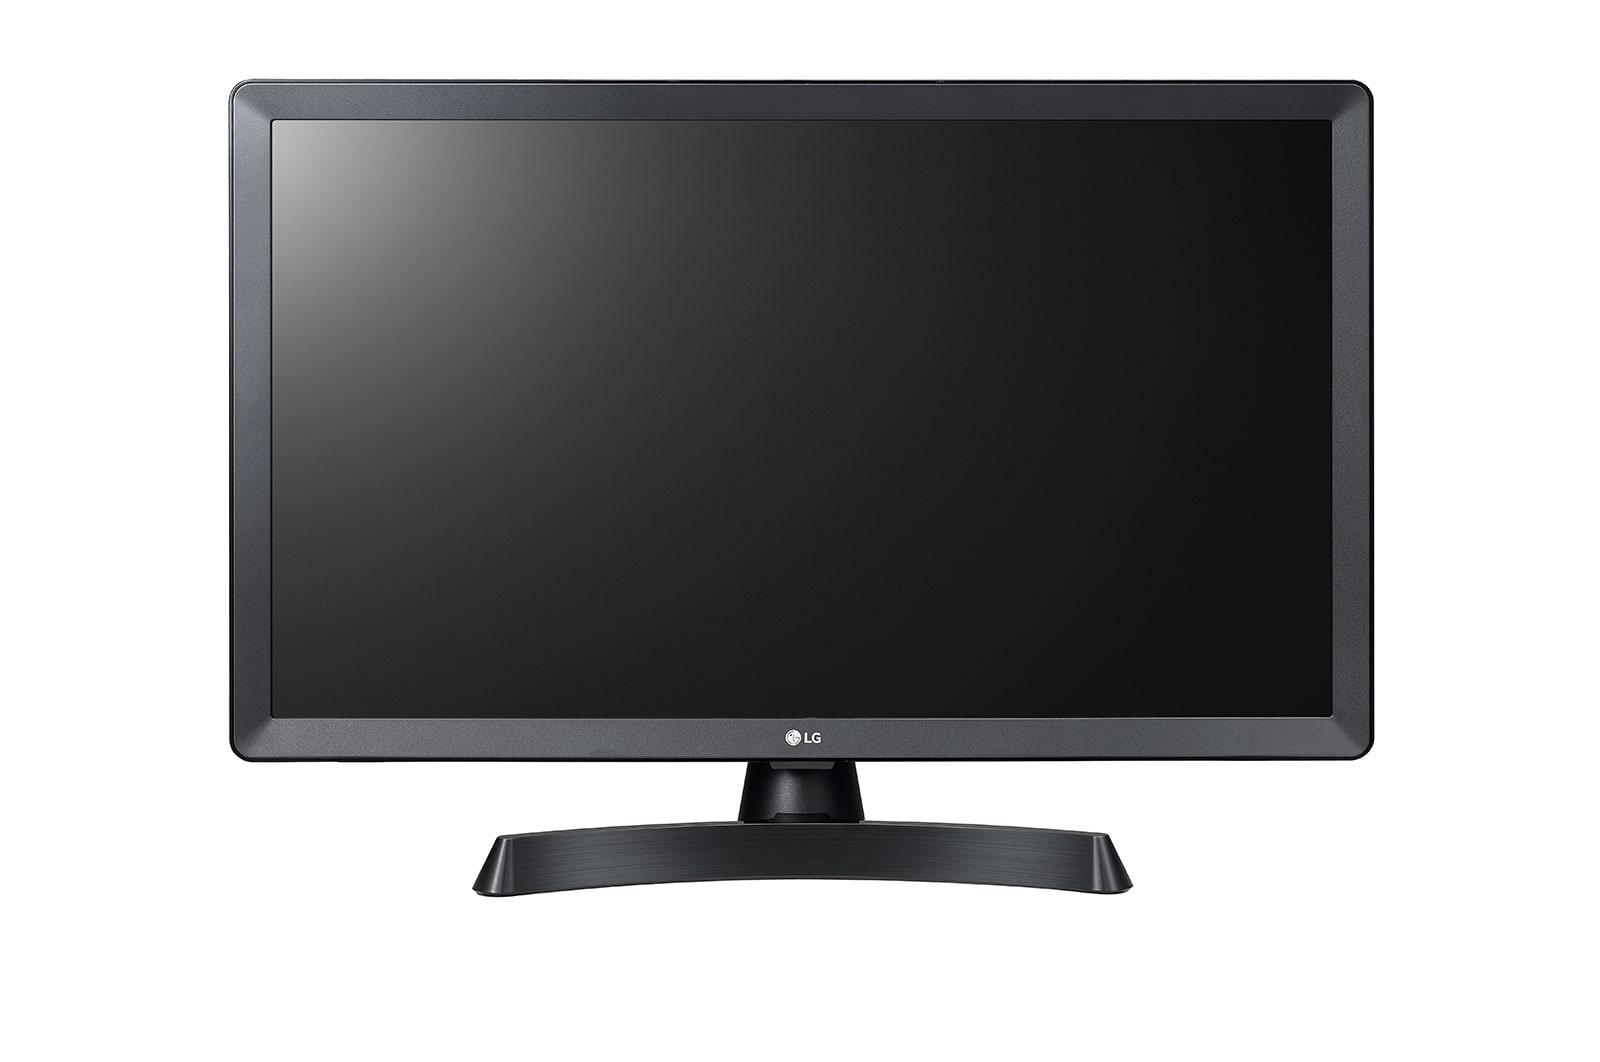 Lg 24" HD Smart TV with webOS 3.5